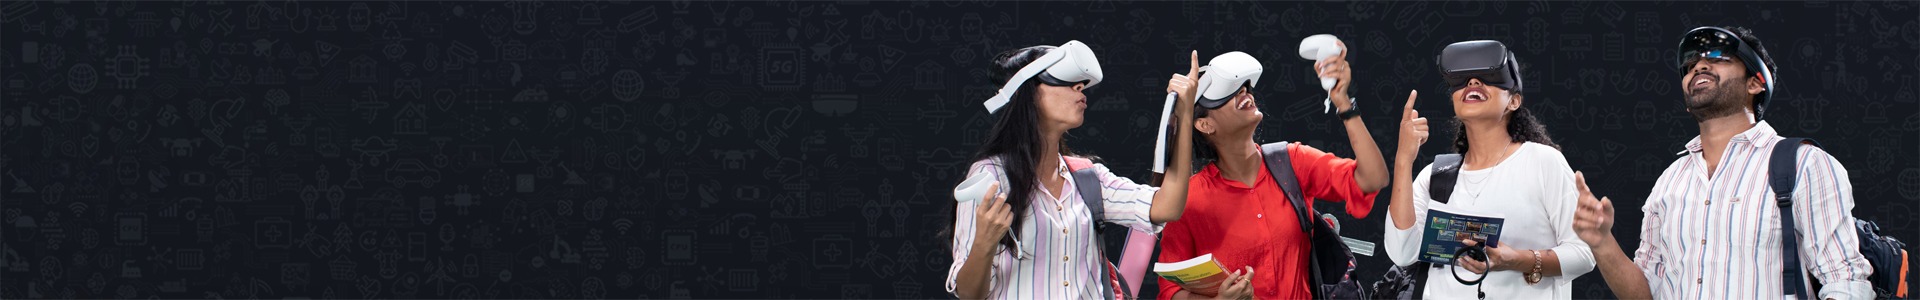 VR and AR courses in the Industry Academic Alliance Program. AR VR courses for College Students.